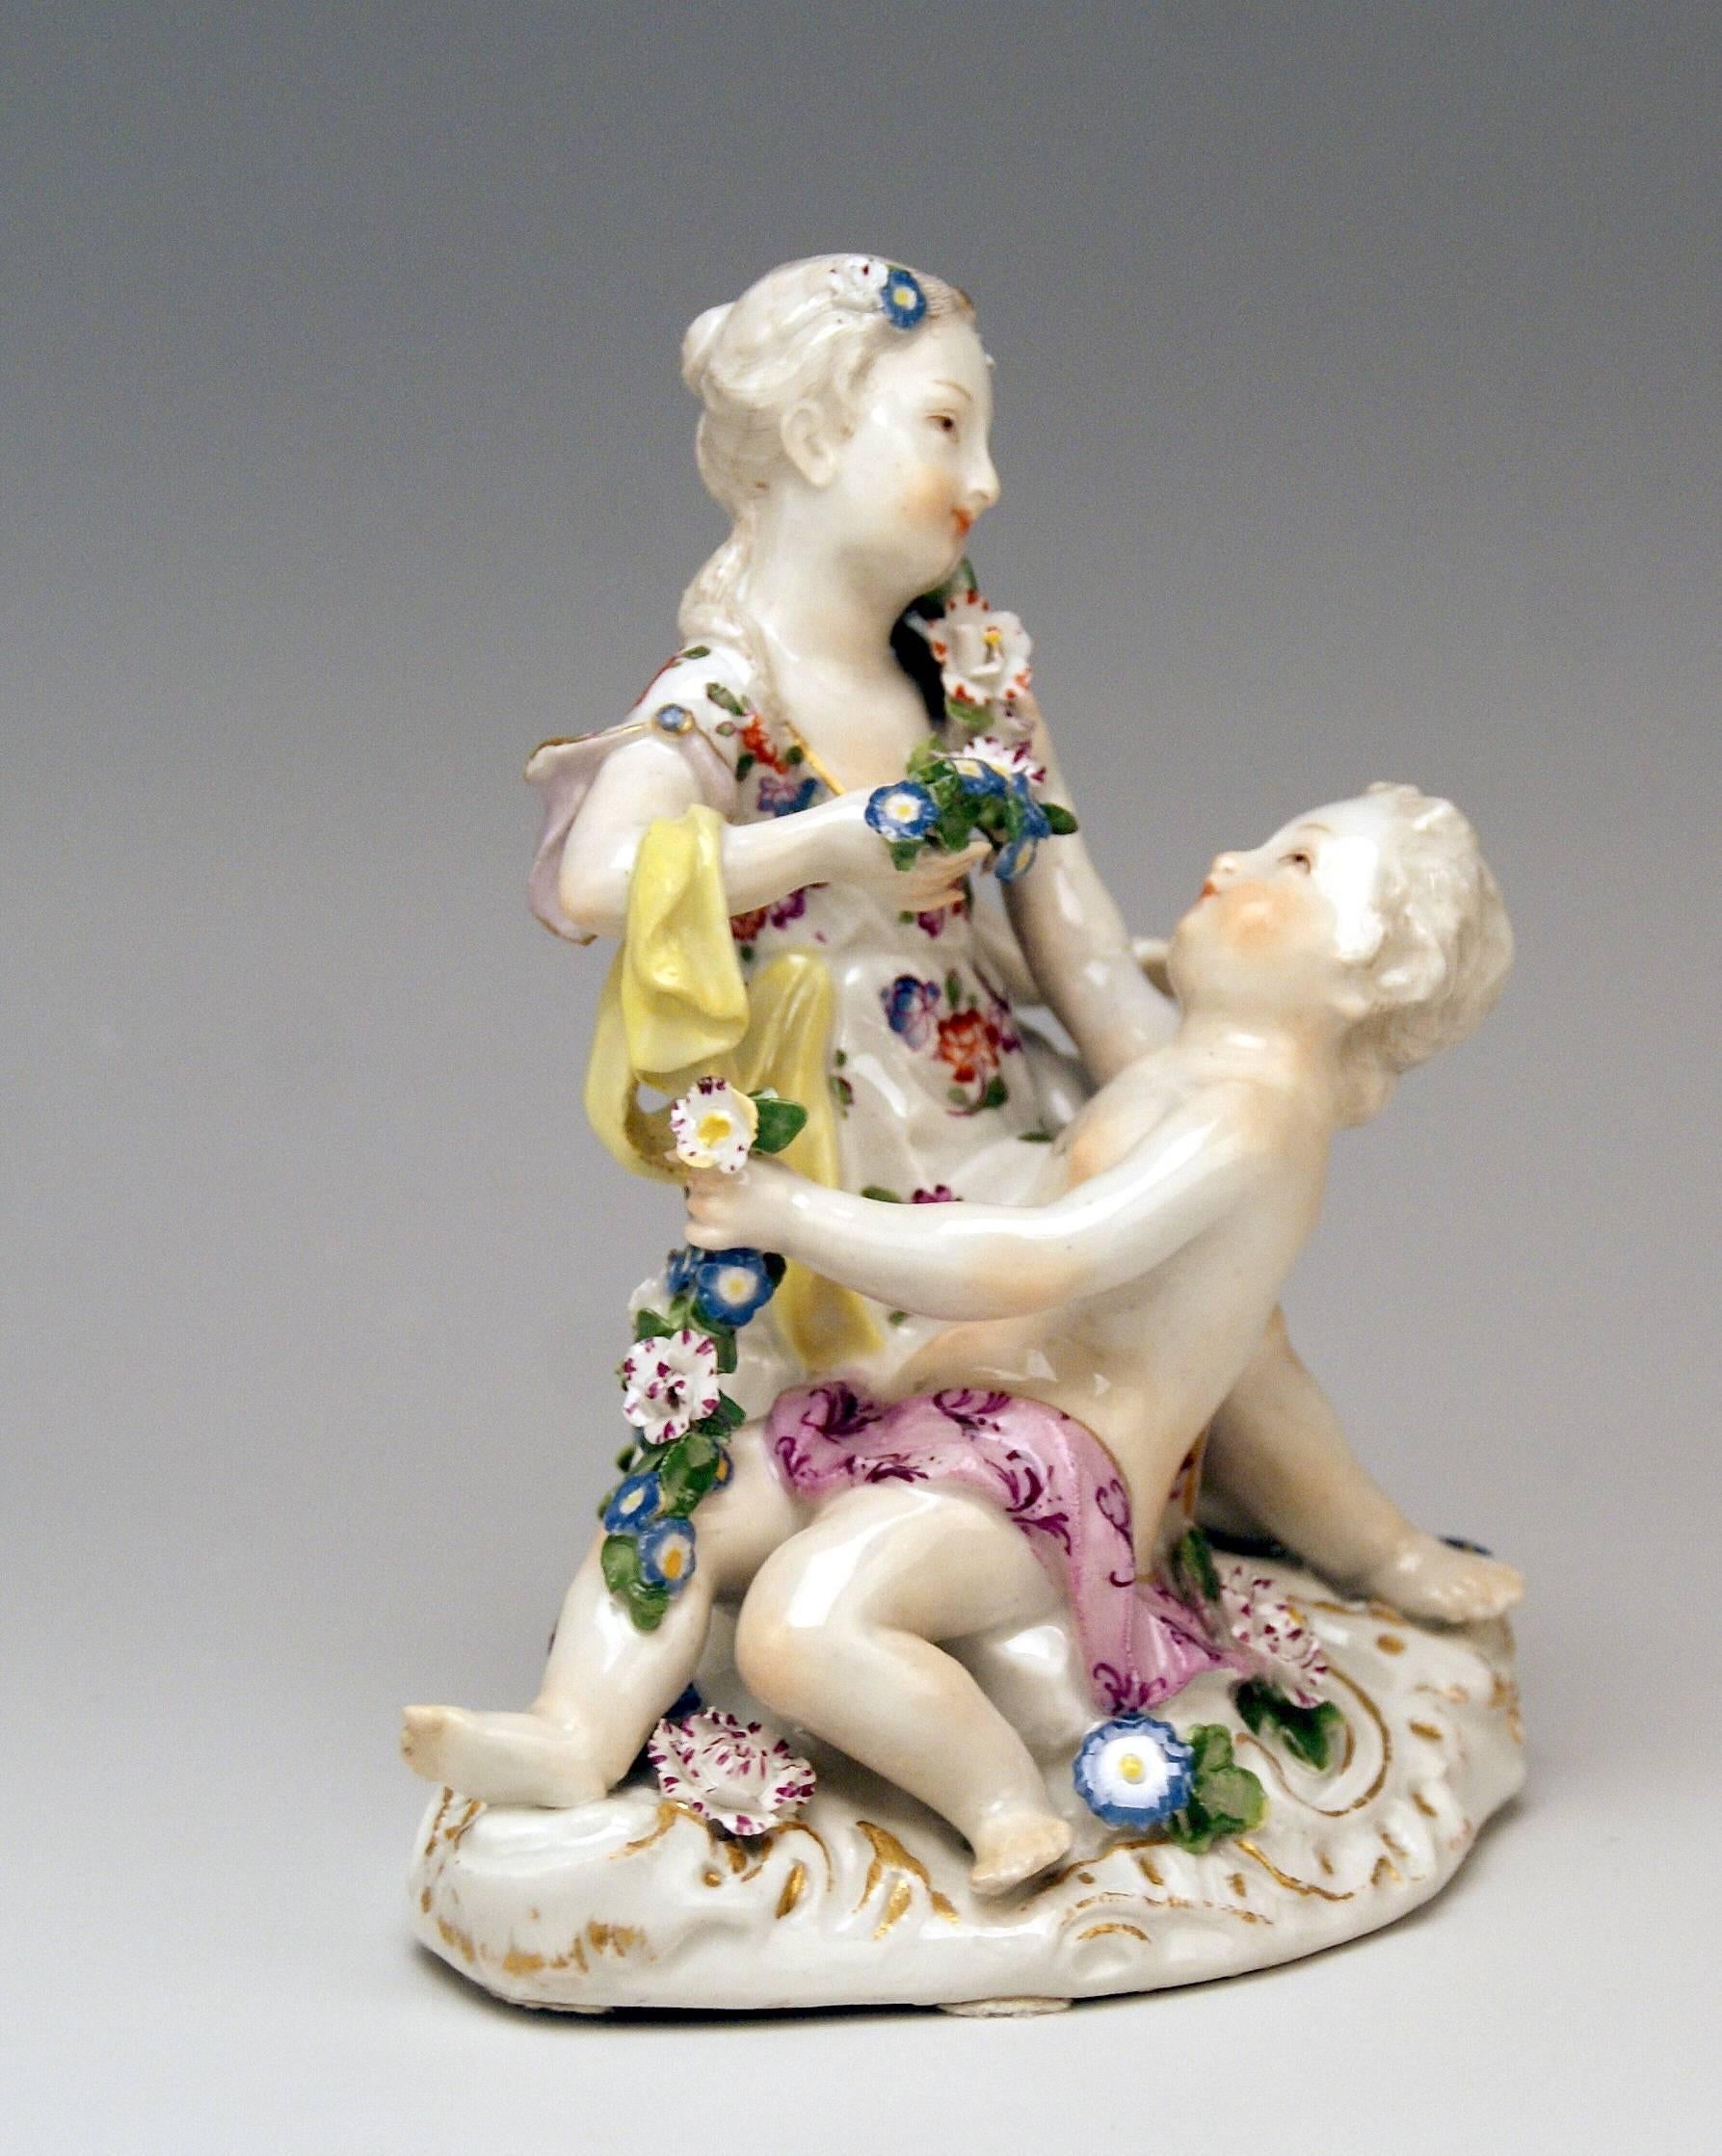 Meissen stunning figurines of lovely appearance: pair of cherubs / cupids as flora and zephyr
Model 2576

Measures:
Height: 5.11 inches (= 13.0 cm)
Width: 4.33 inches (= 11.0 cm)
Depth: 2.95 inches (= 7.5 cm)

Manufactory: